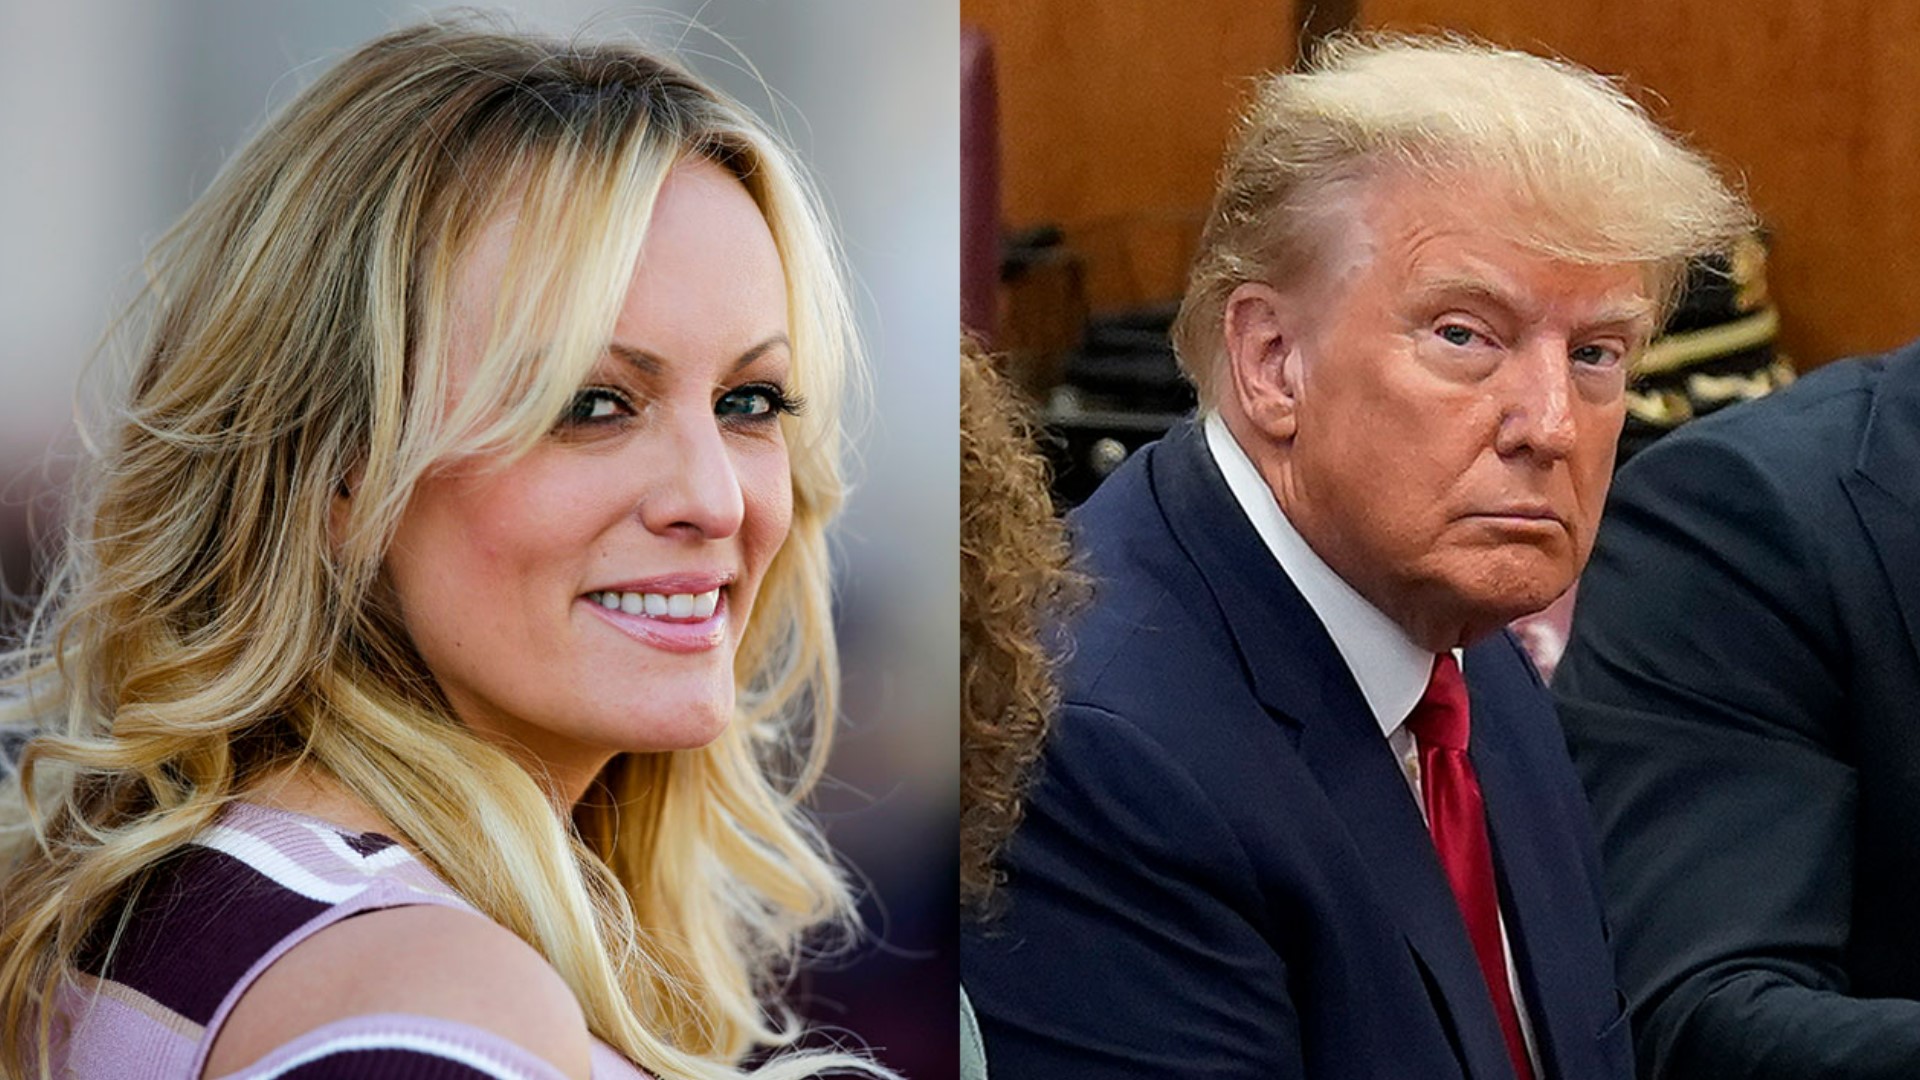 Stormy Daniels is set to testify again in Donald Trump's hush money trial on Thursday.